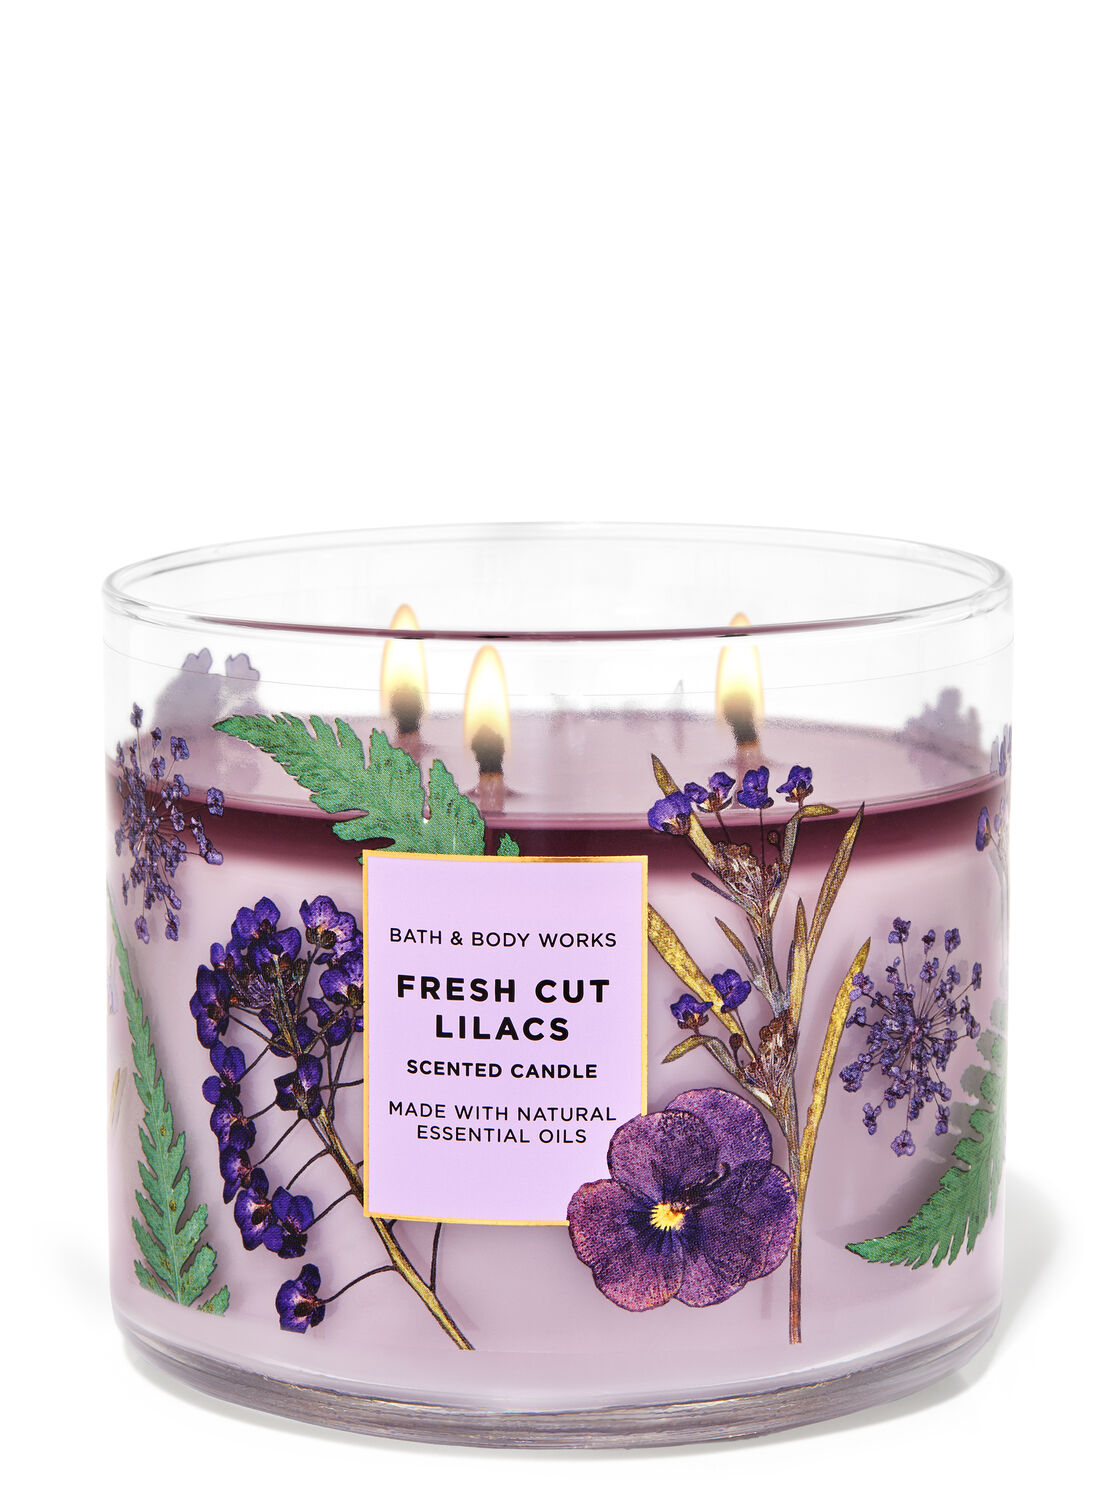 1 Bath & Body Works FRESH CUT LILACS Large 3-Wick Scented Candle 14.5 oz 